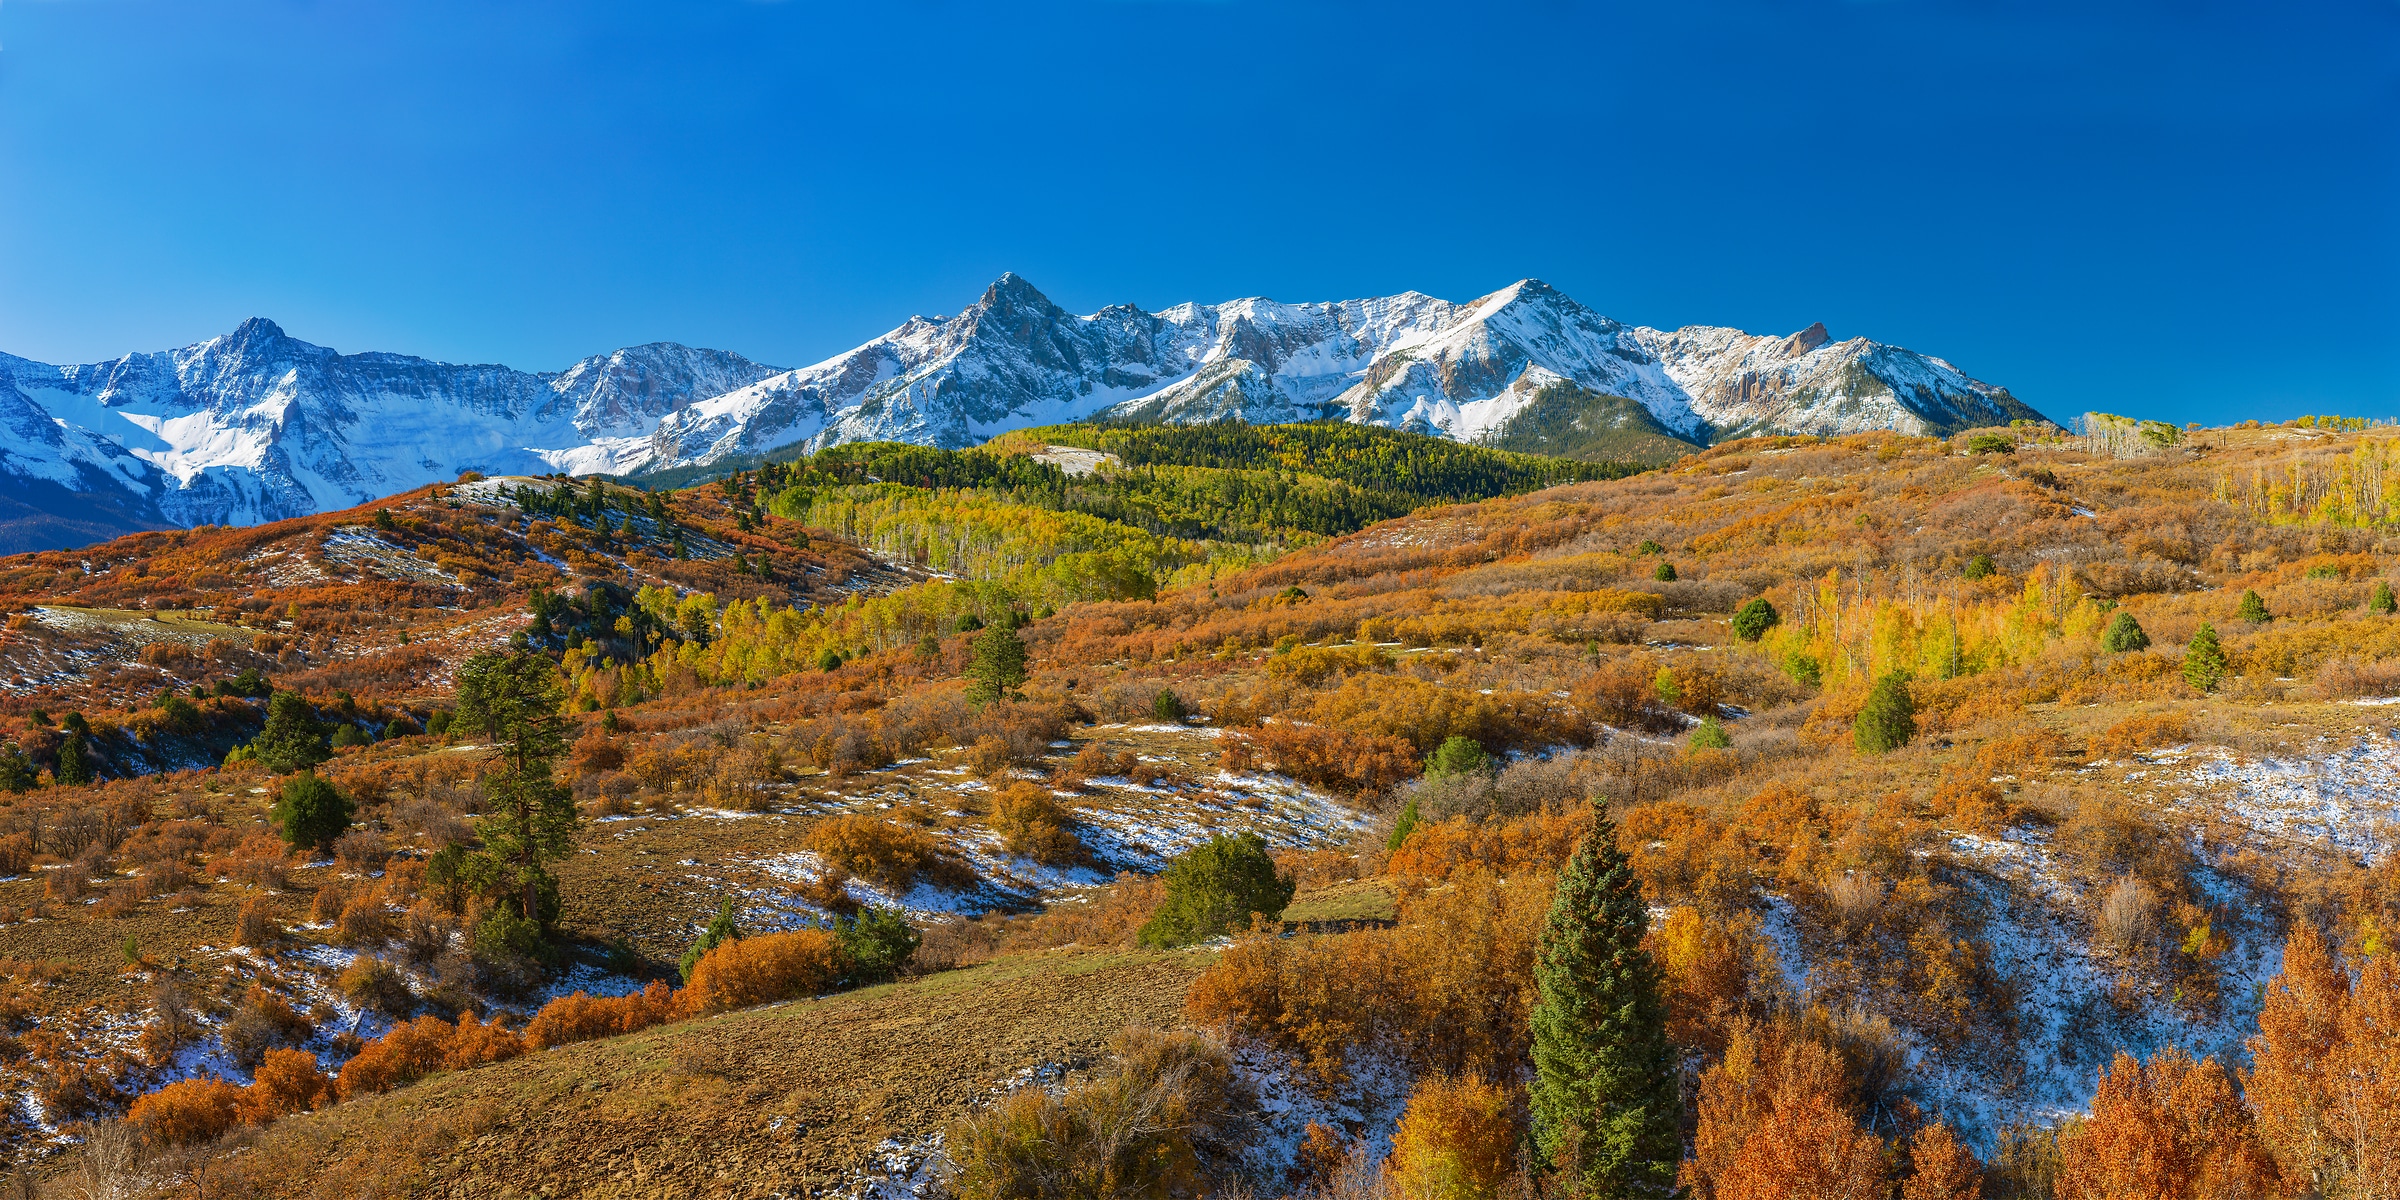 421 megapixels! A very high resolution, large-format VAST photo print of the Dallas Divide mountains in fall with snow and autumn foliage; landscape photograph created by John Freeman in Dallas Divide Overlook, Ridgeway, Colorado